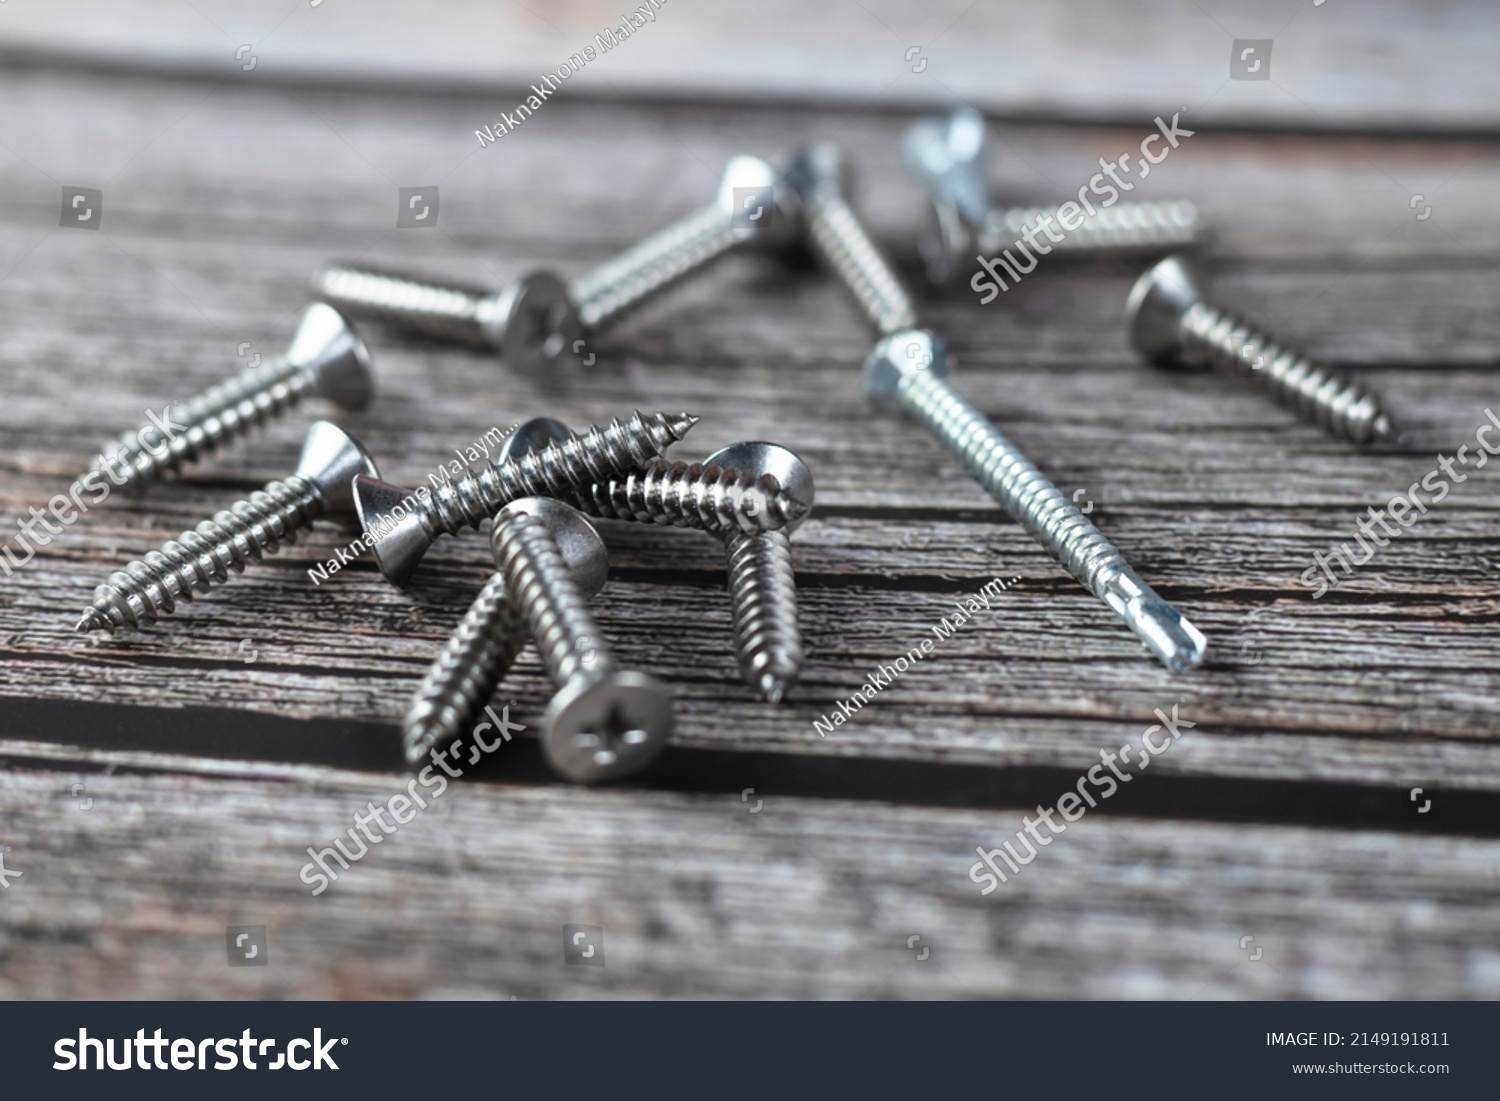 Tapping screws made of steel on wood background, metal screw, iron screw, chrome screw, screws as a background, wood screw, concept industry. copy space for text. #2149191811